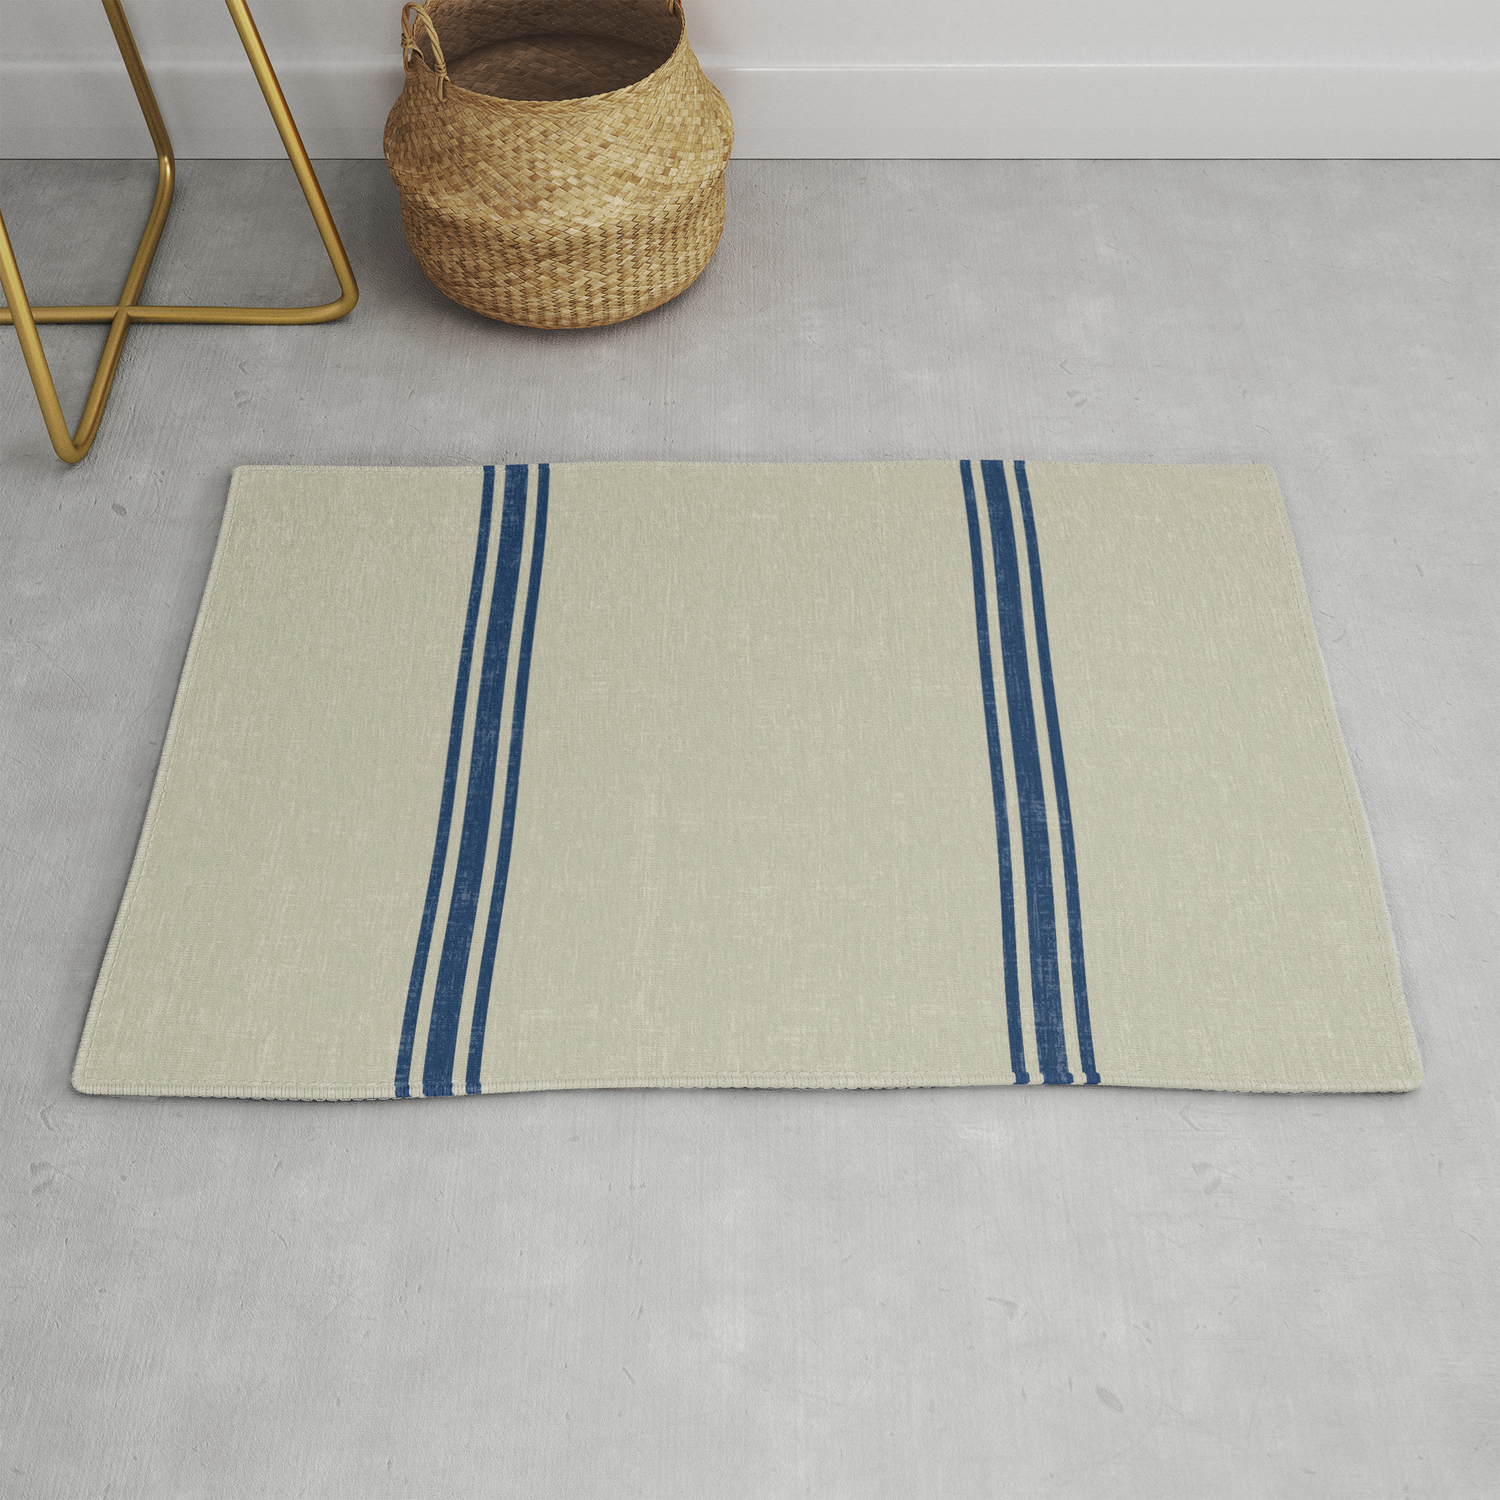 Blue Stripes On Linen Color Background, Country French Rugs